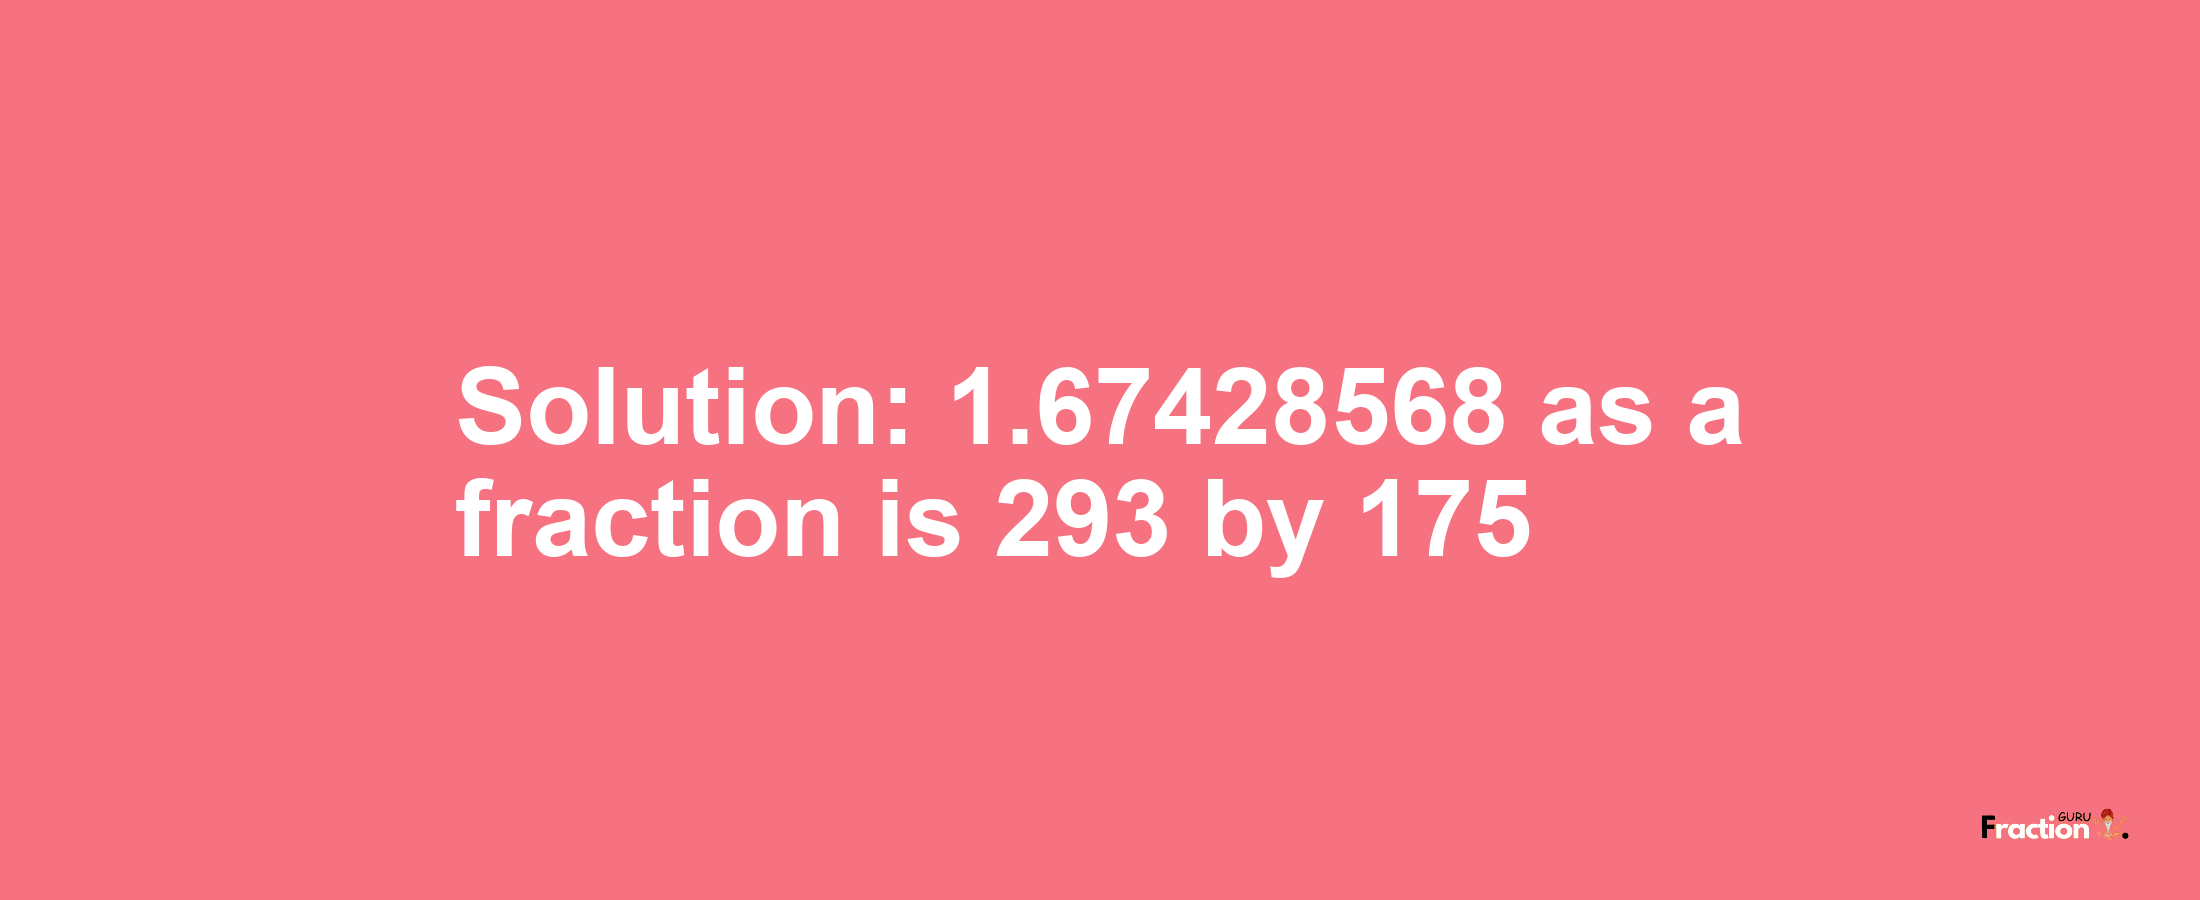 Solution:1.67428568 as a fraction is 293/175